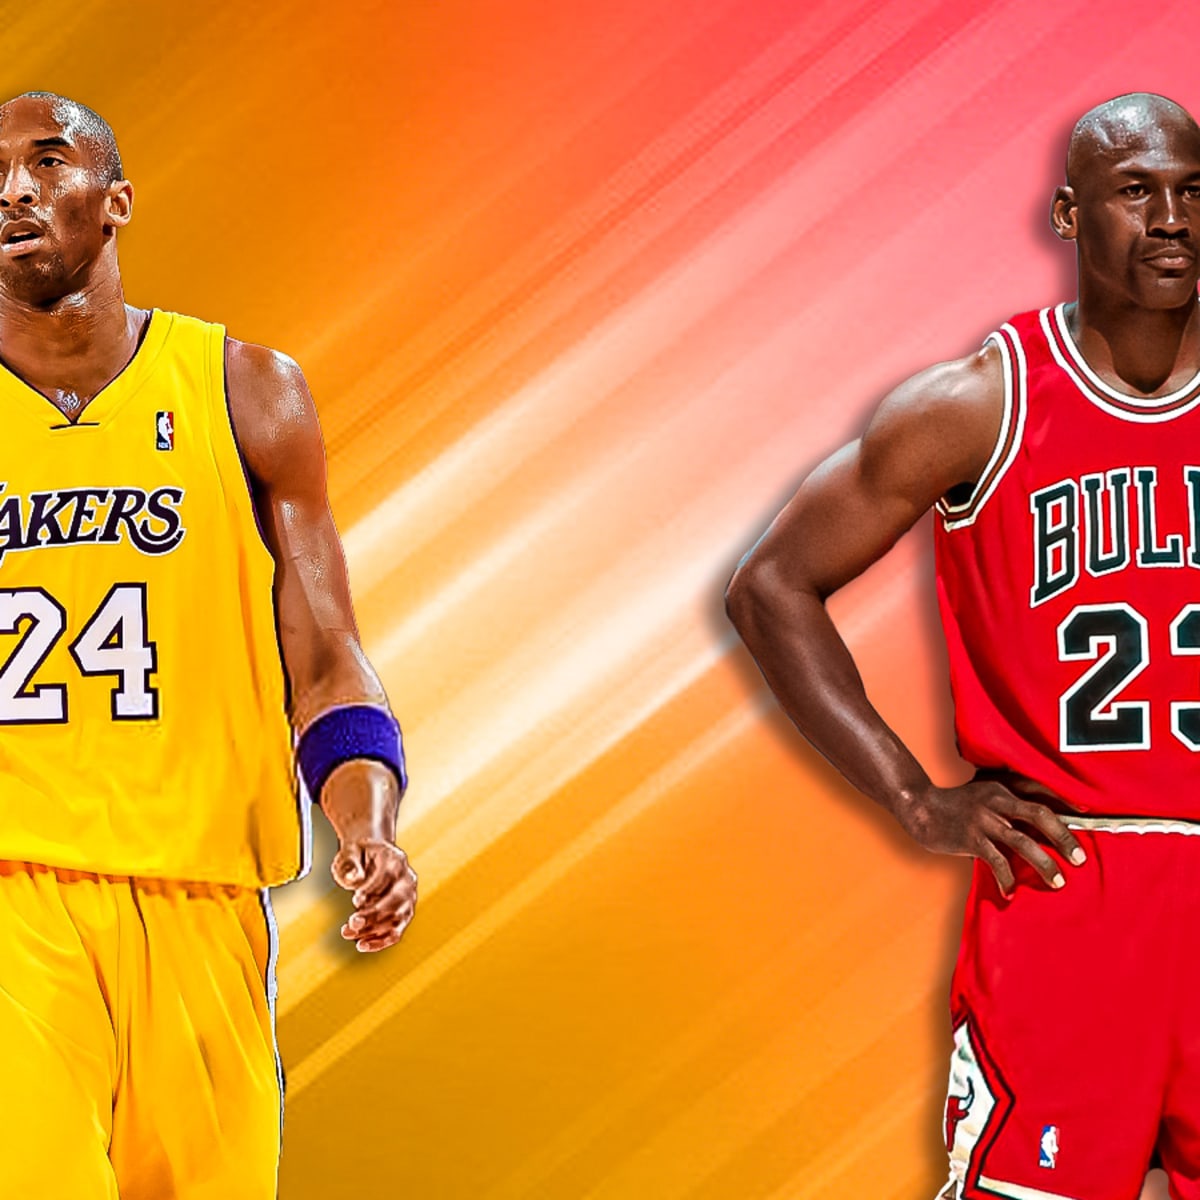 NBA players wearing Kobe Bryant numbers who are making the switch